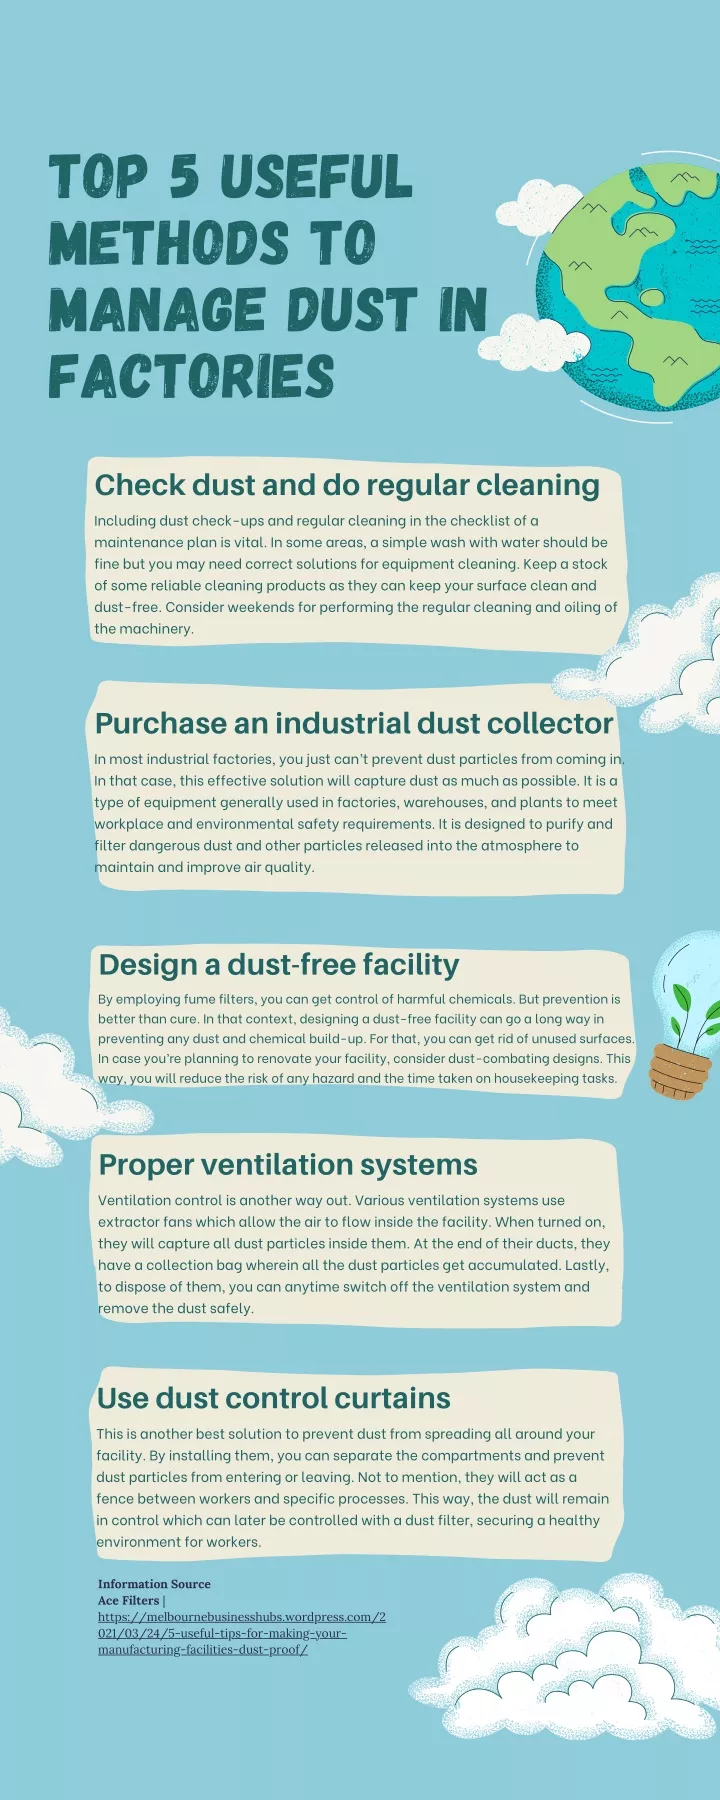 top 5 useful methods to manage dust in factories